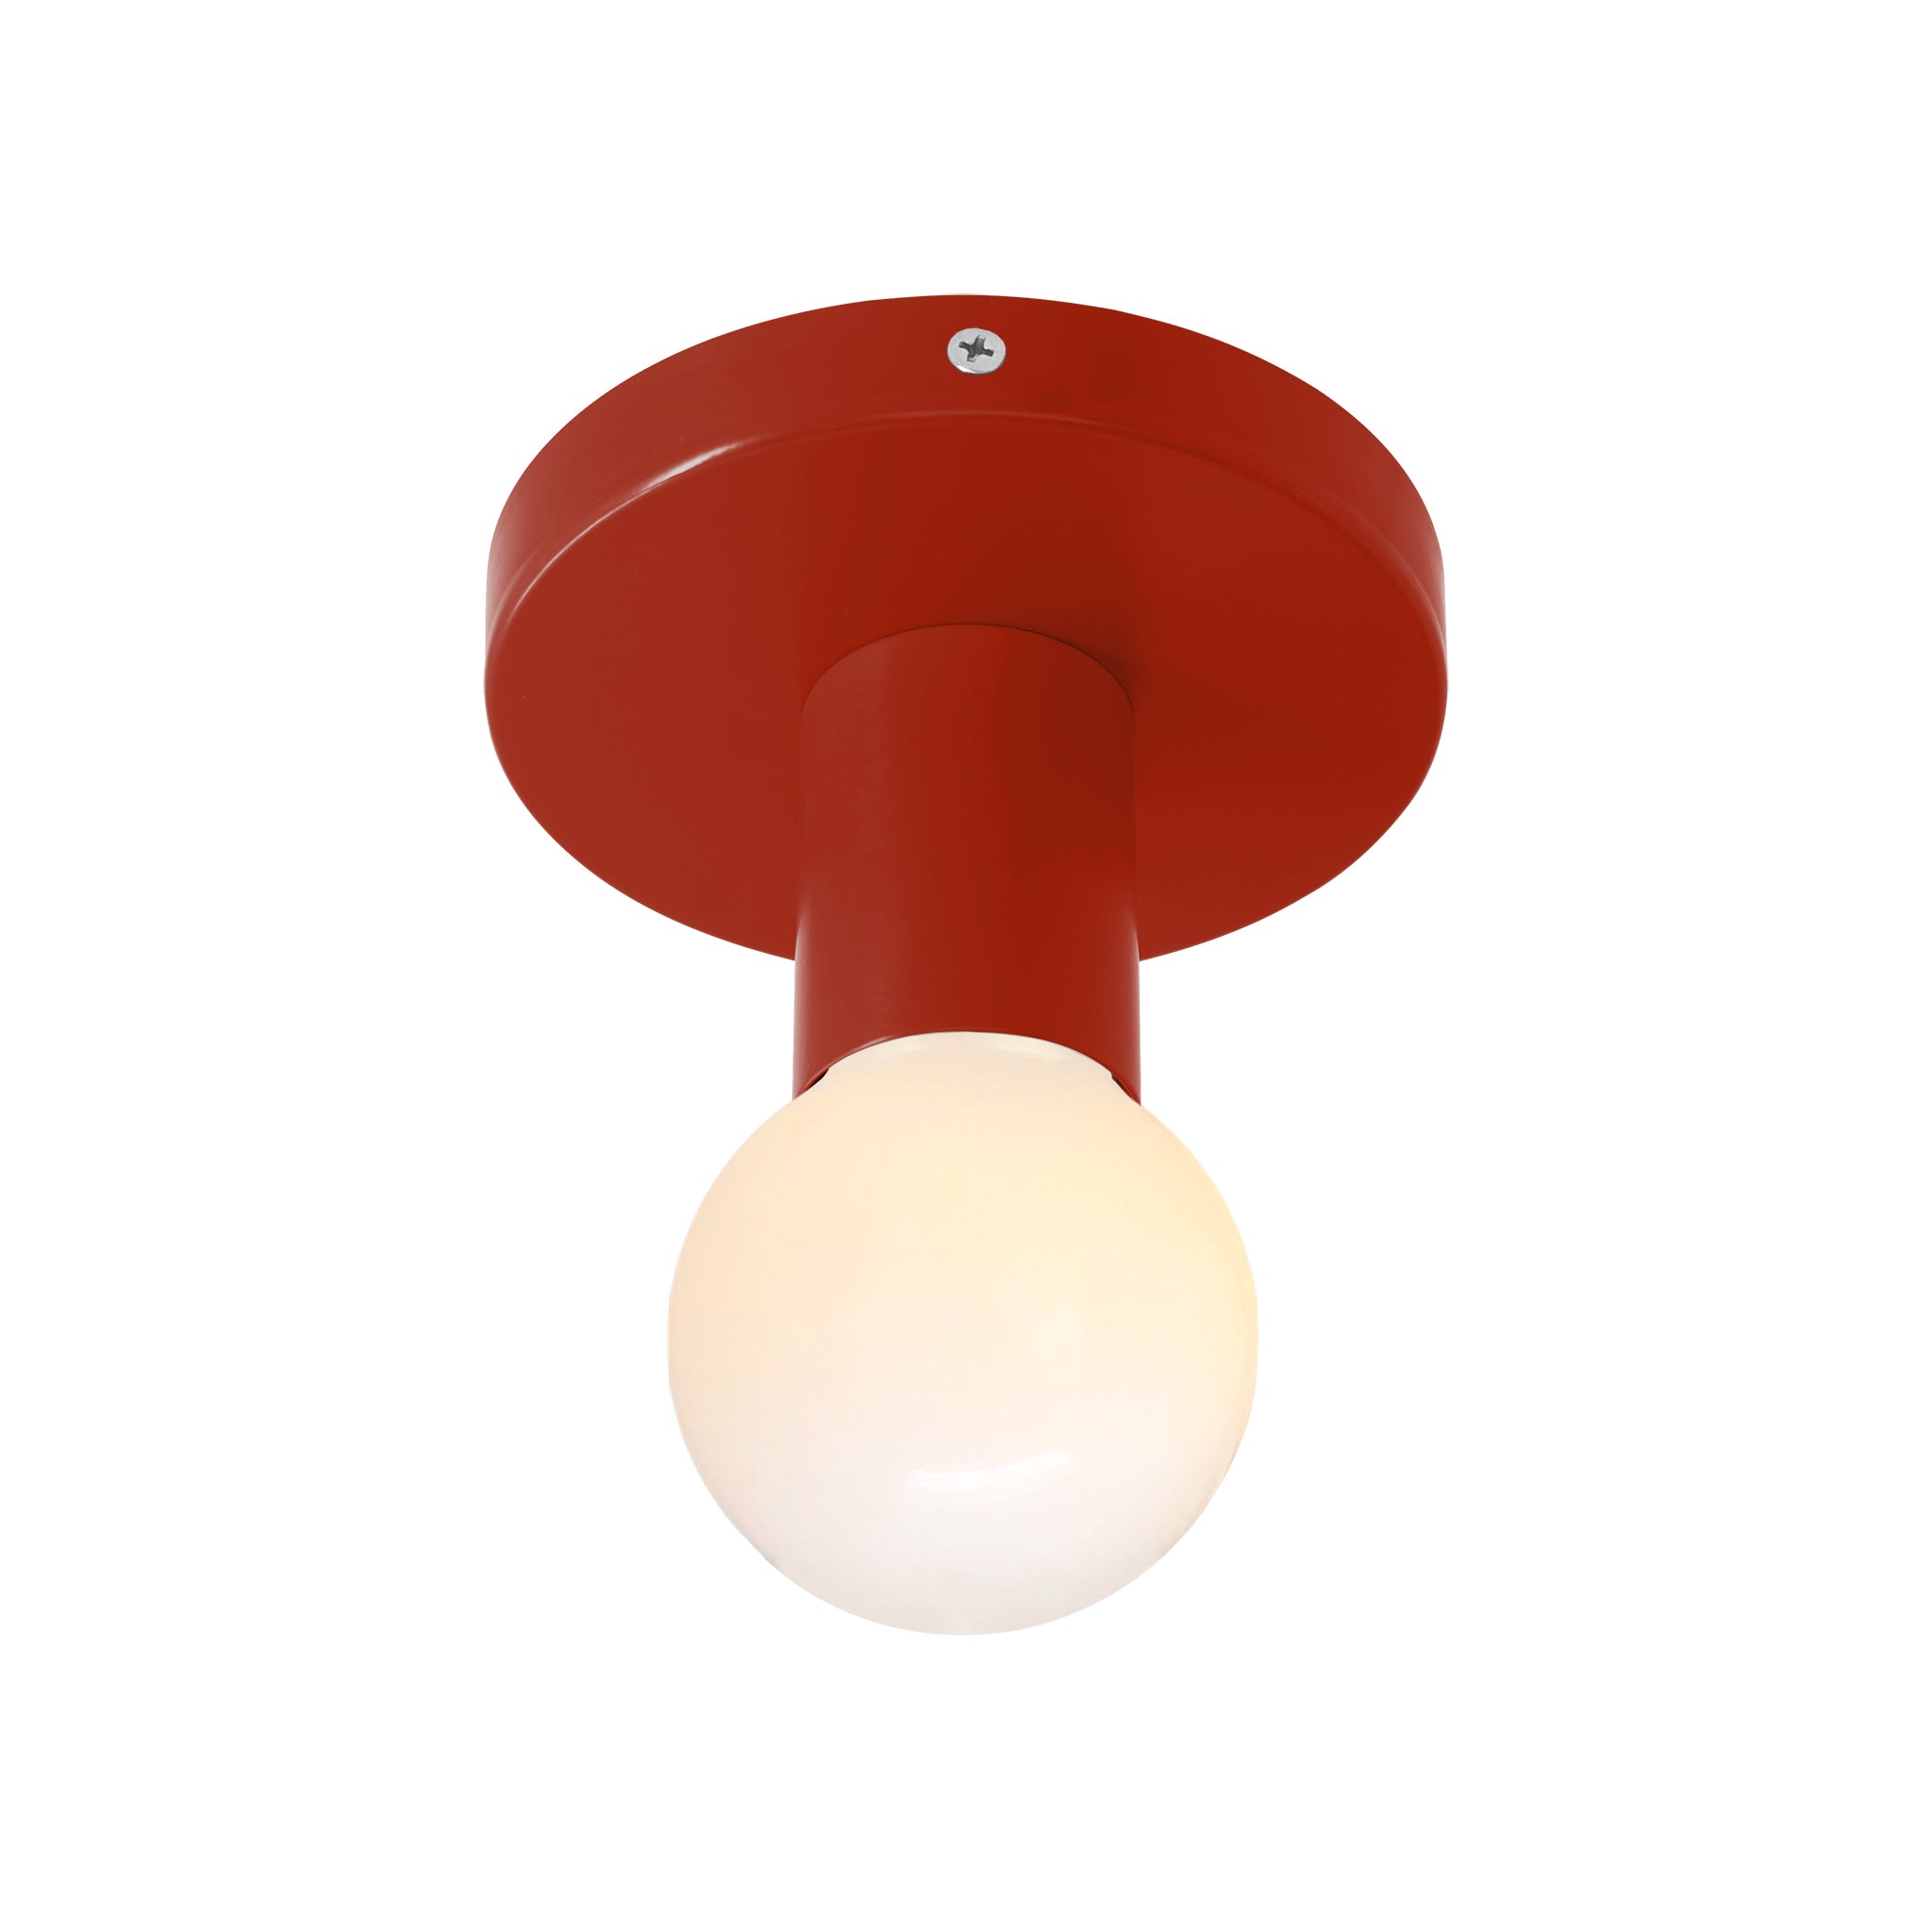 Nickel and riding hood red color Twink flush mount Dutton Brown lighting